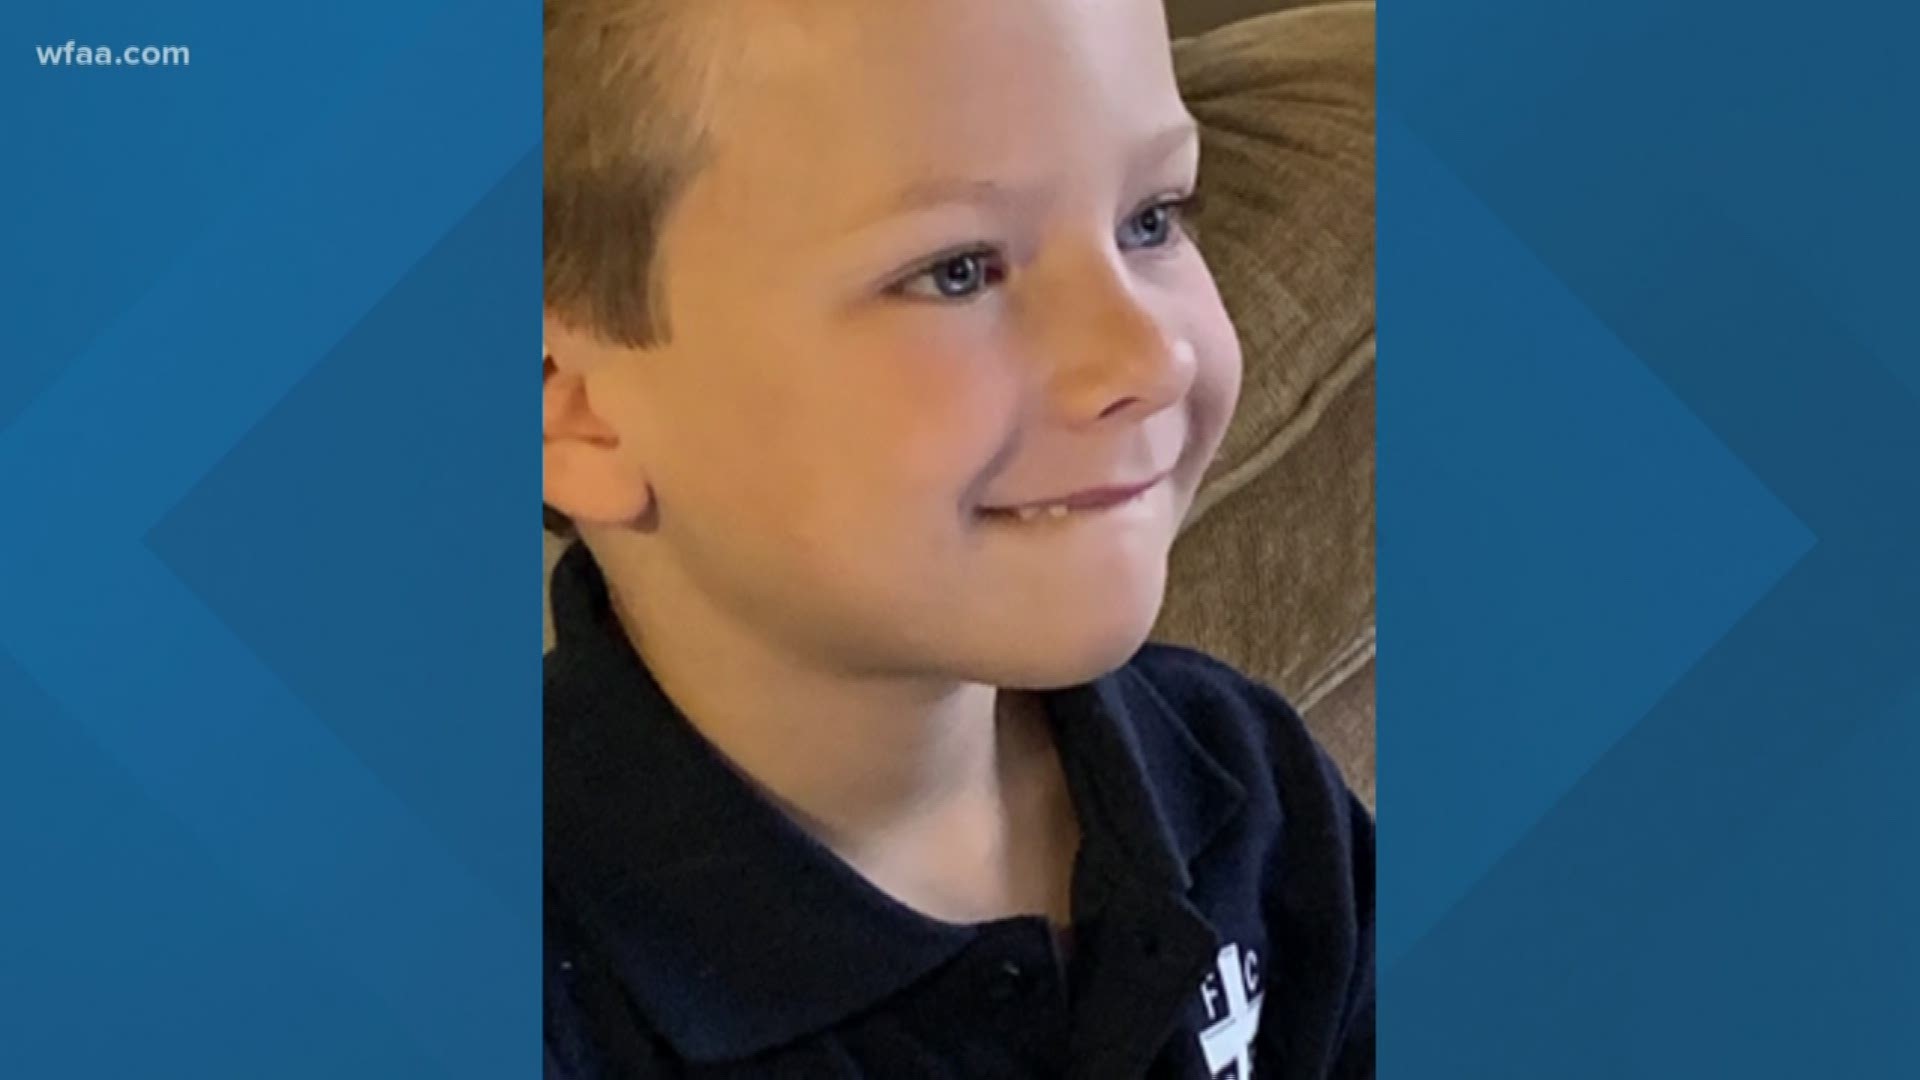 A 6-year-old boy and his mother were both found dead Friday night in a parking garage after an Amber Alert was issued for the child earlier in the evening, confirmed Waxahachie police.